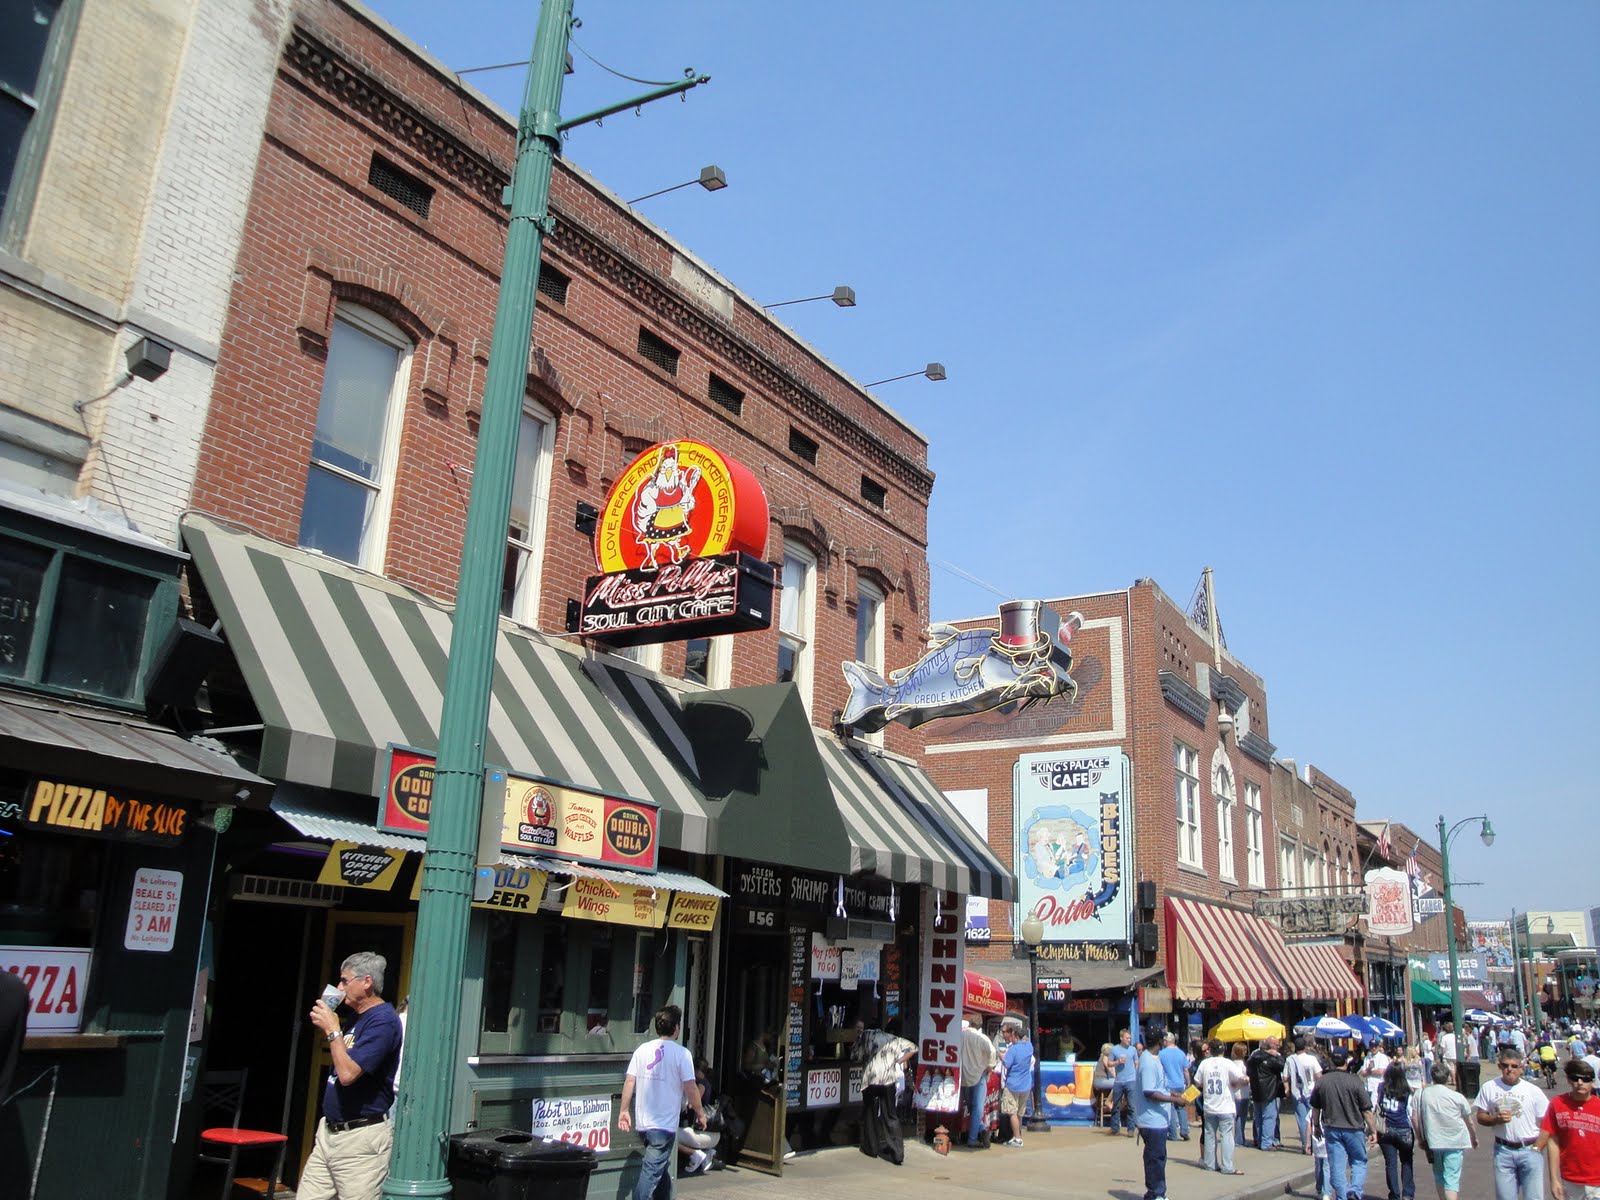 Top-of-the-Arch: HOME OF THE BLUES (BEALE STREET IN MEMPHIS, NOT THE ST